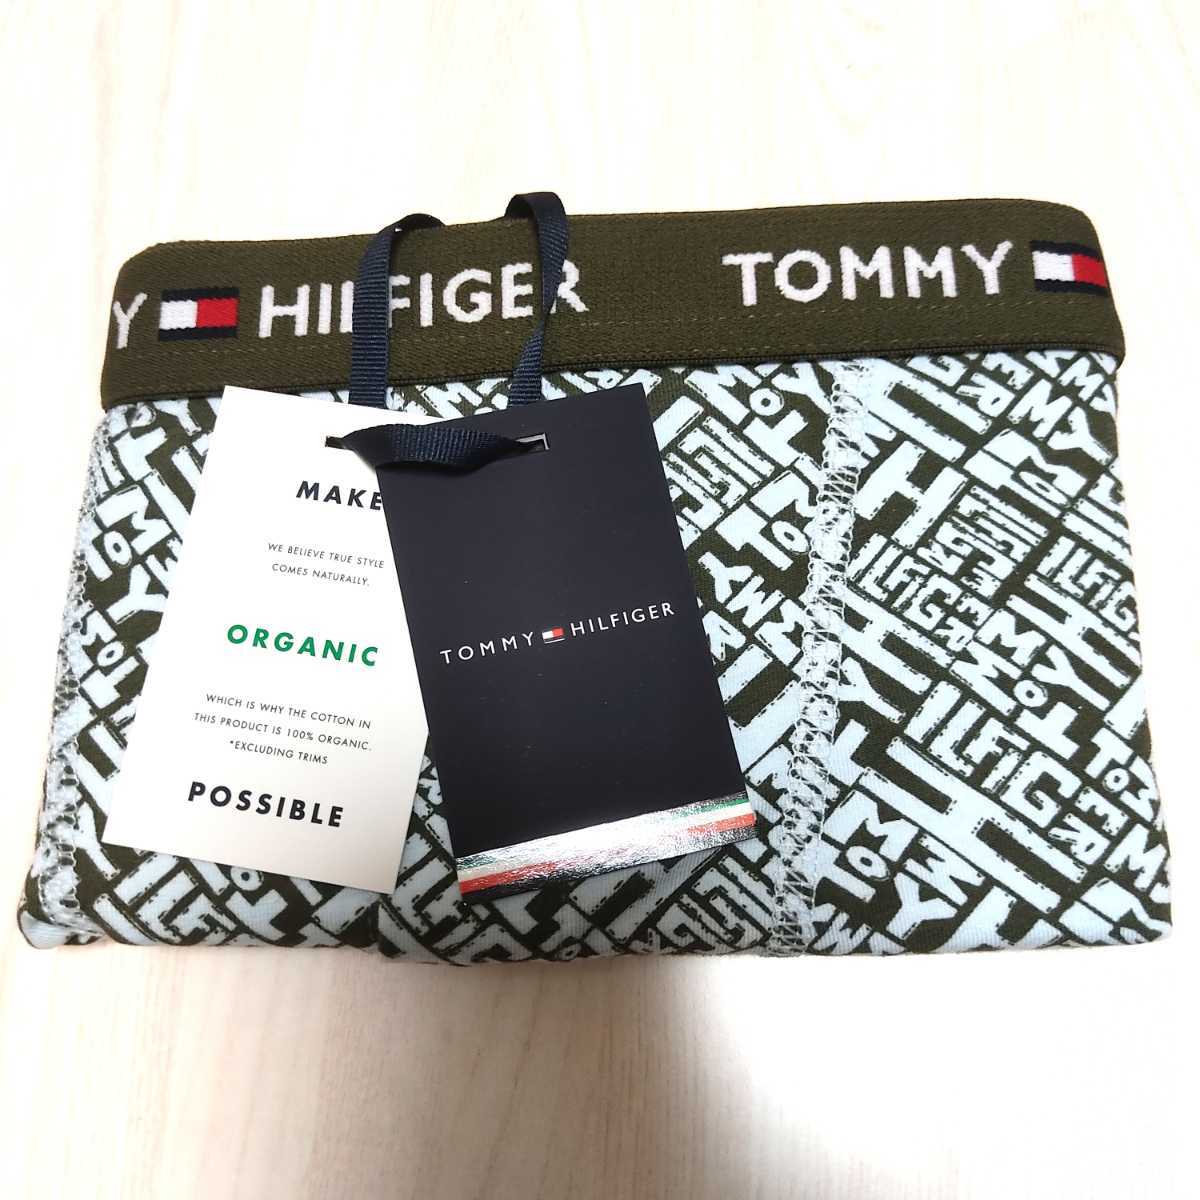 TOMMY HILFIGER トミーヒルフィガー COTTON BUTTON FLY BOXER BRIEF PRINT 前開き ボクサーパンツ メンズ 53302015 カーキー M